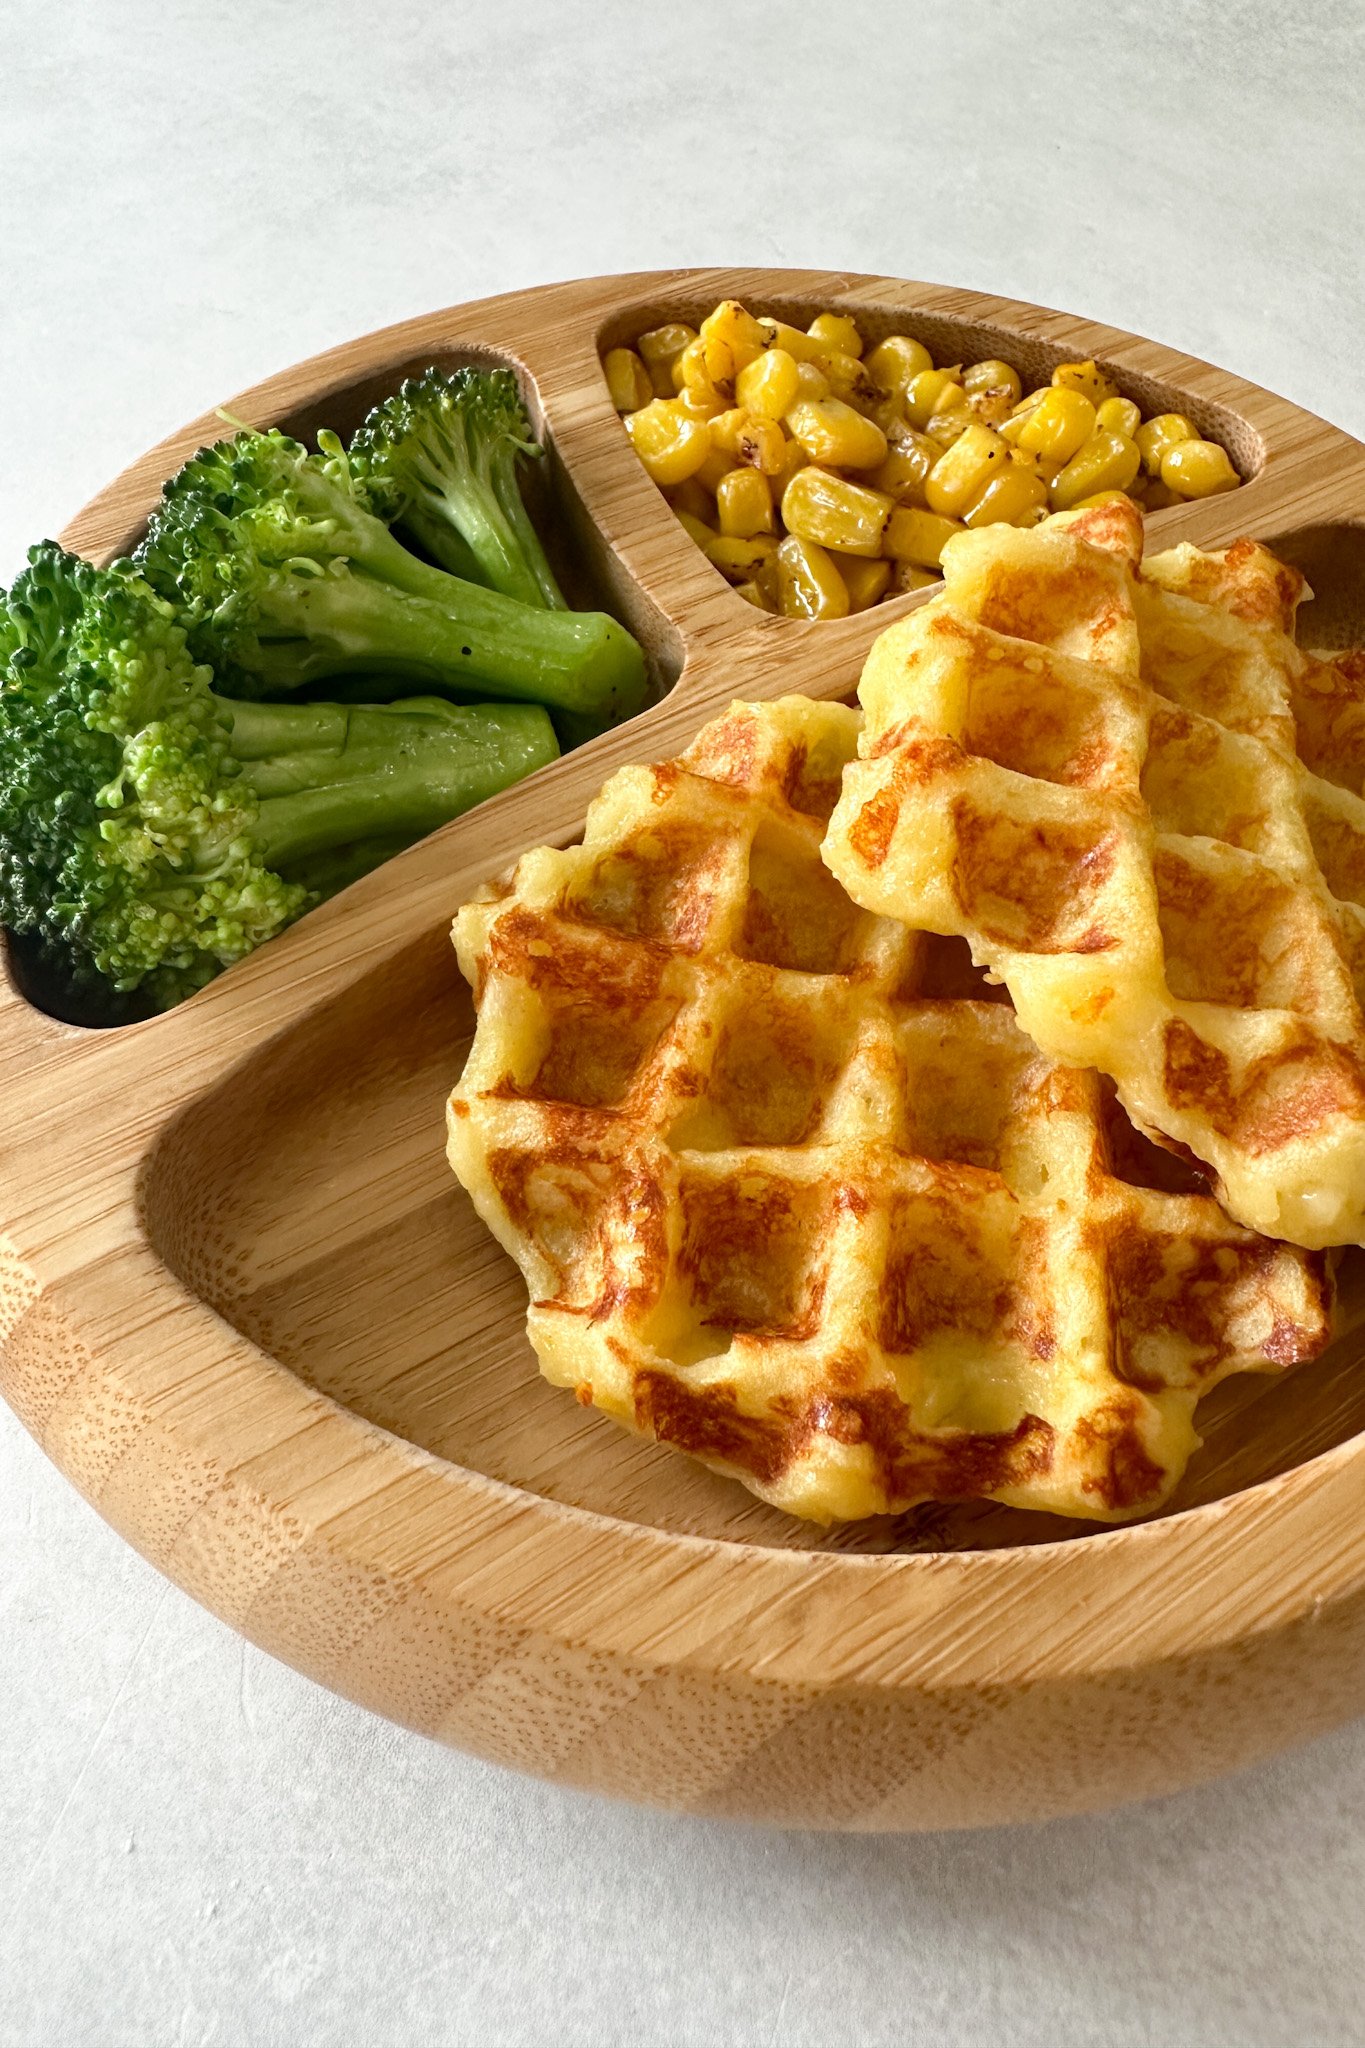 Leftover mashed potato waffles served with broccoli and corn.